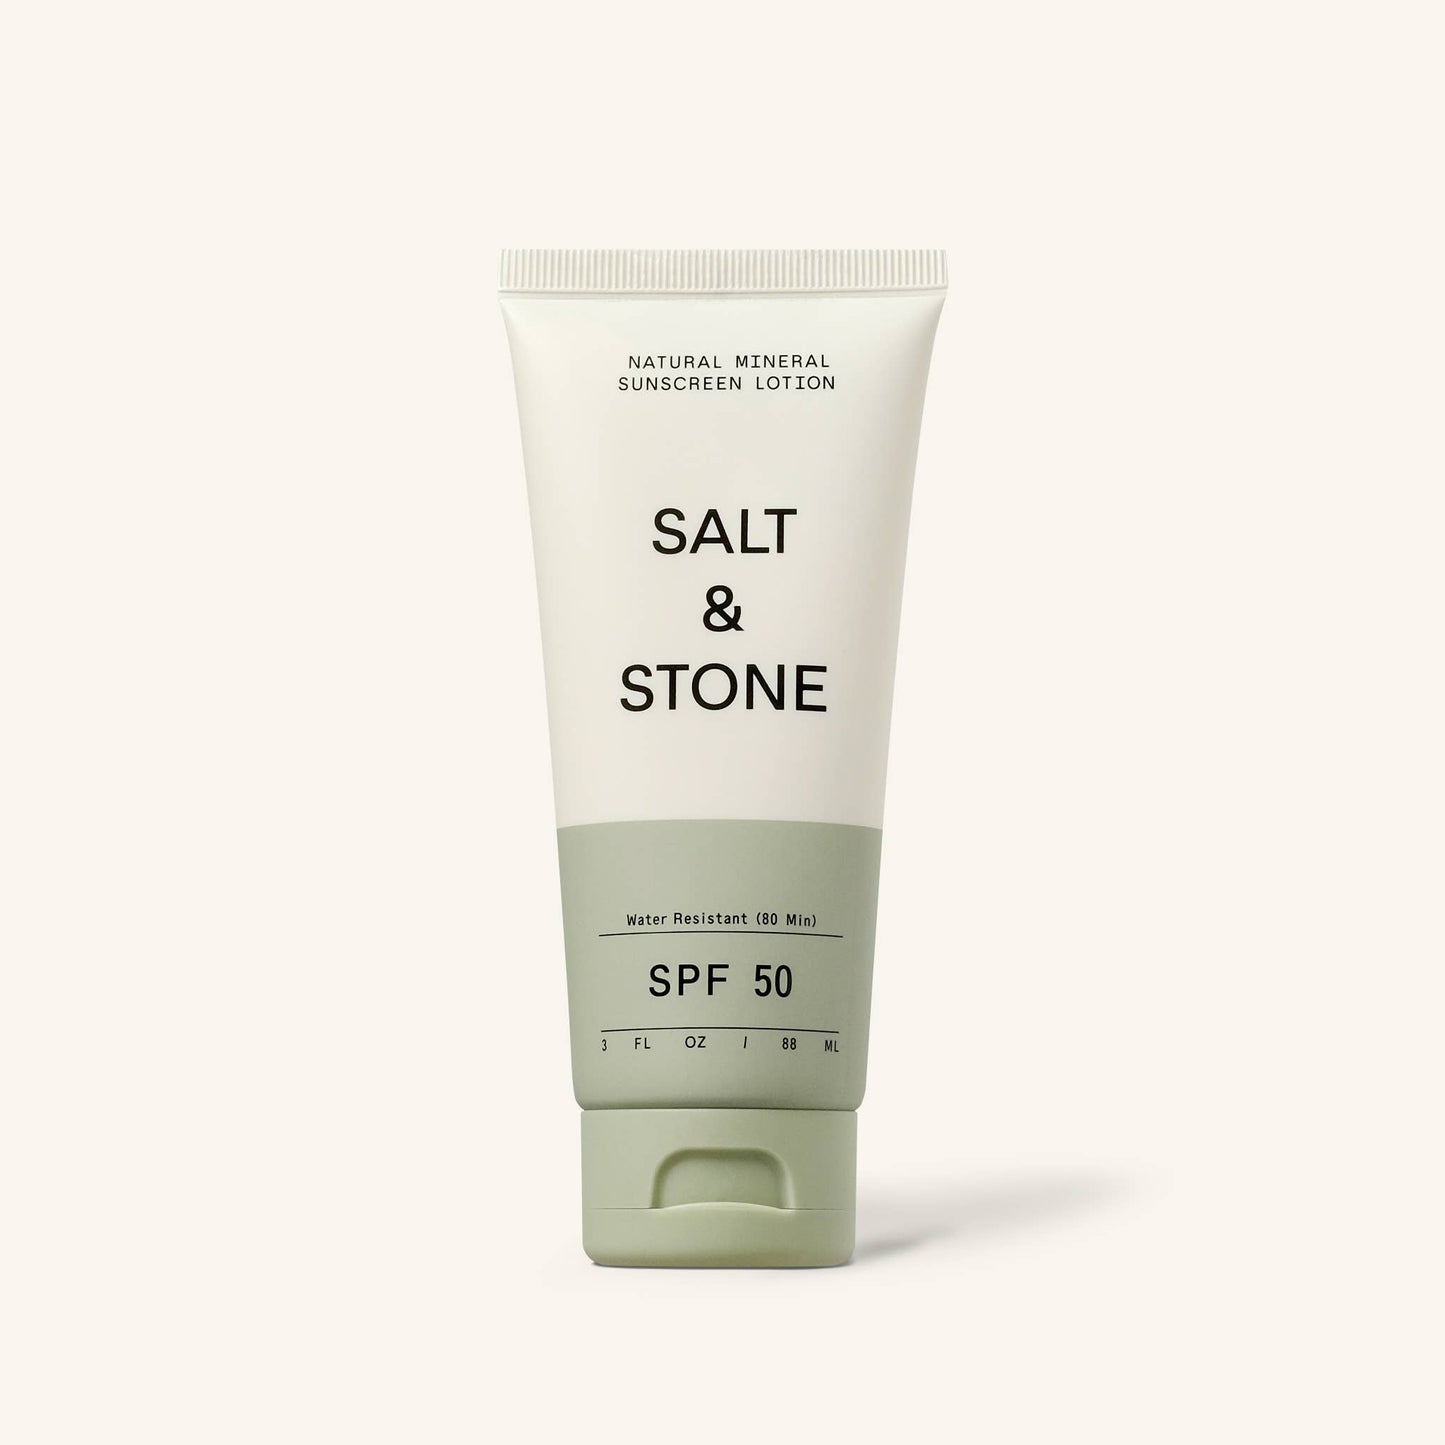 SALT & STONE - Natural Mineral Sunscreen Lotion SPF 50